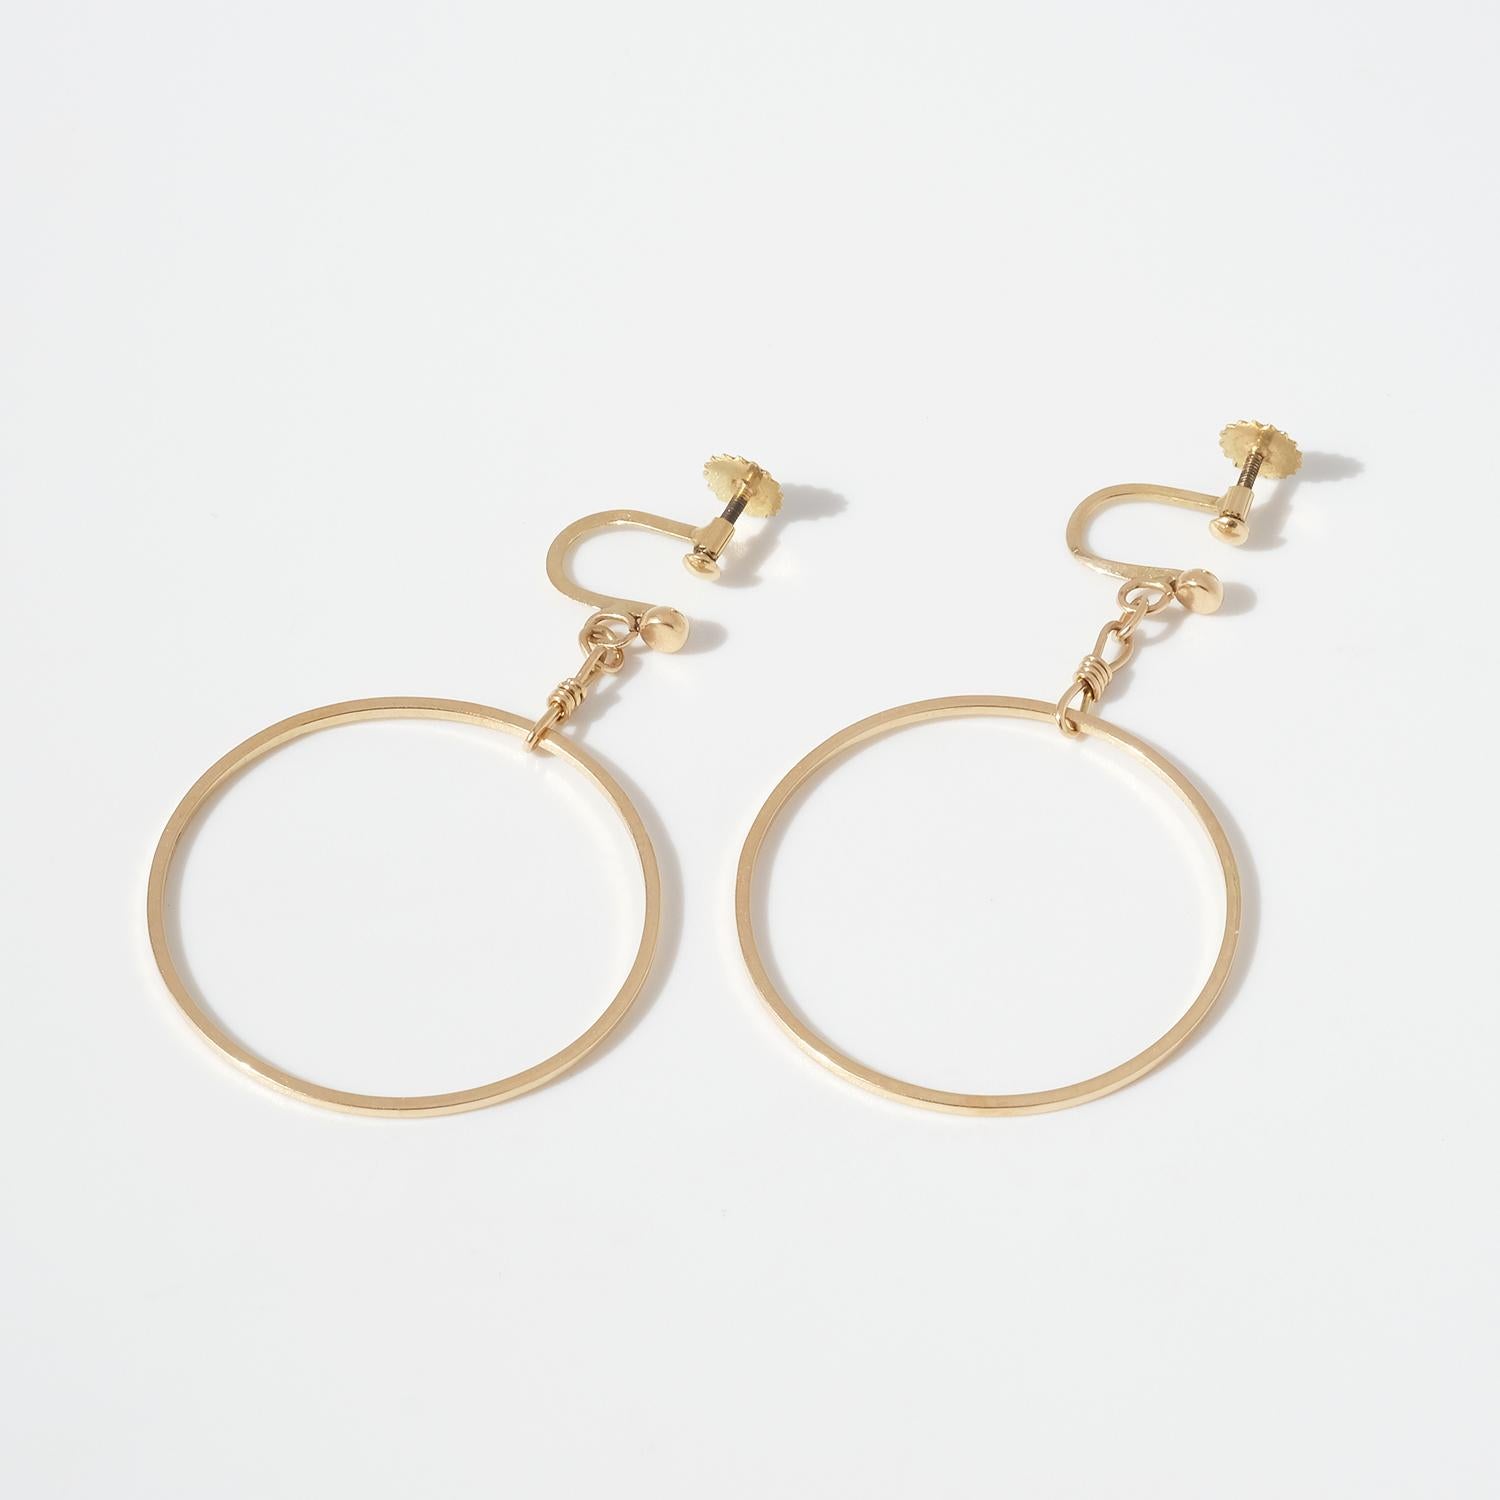 Pair of 18 K Gold Earrings Made in 1956, Swedish 6